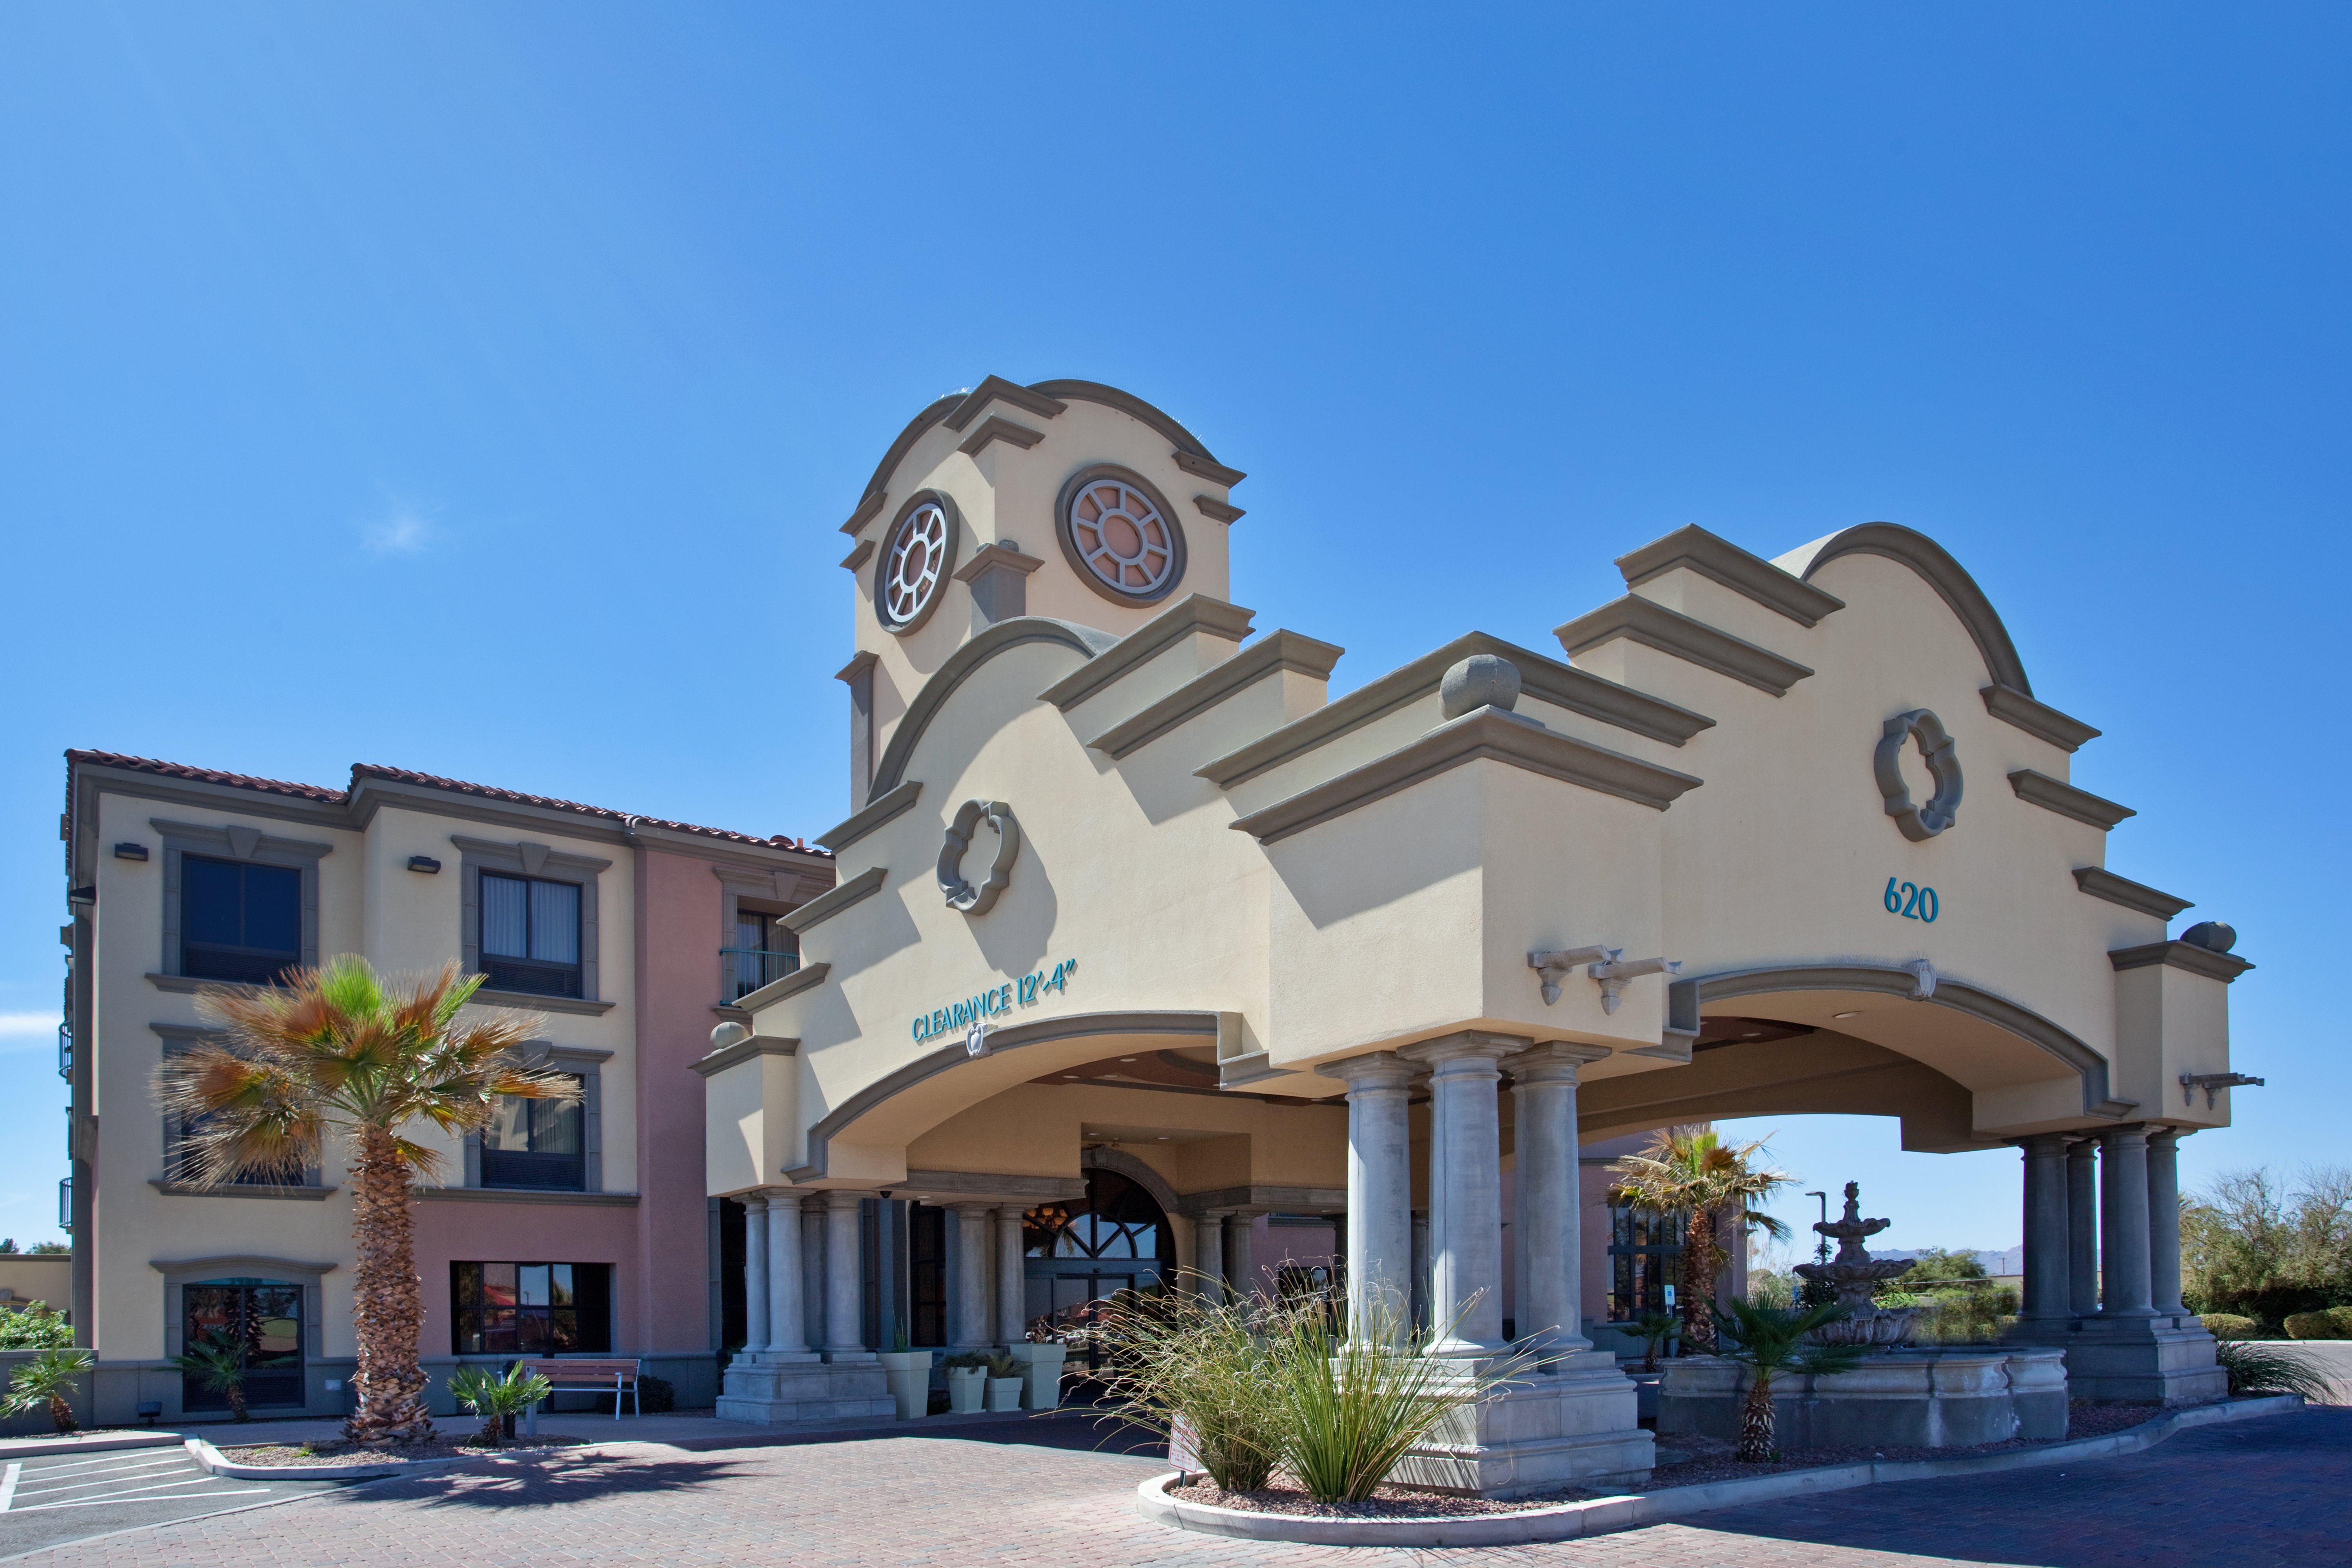 Stay with Holiday Inn Express & Suites Tucson Mall!